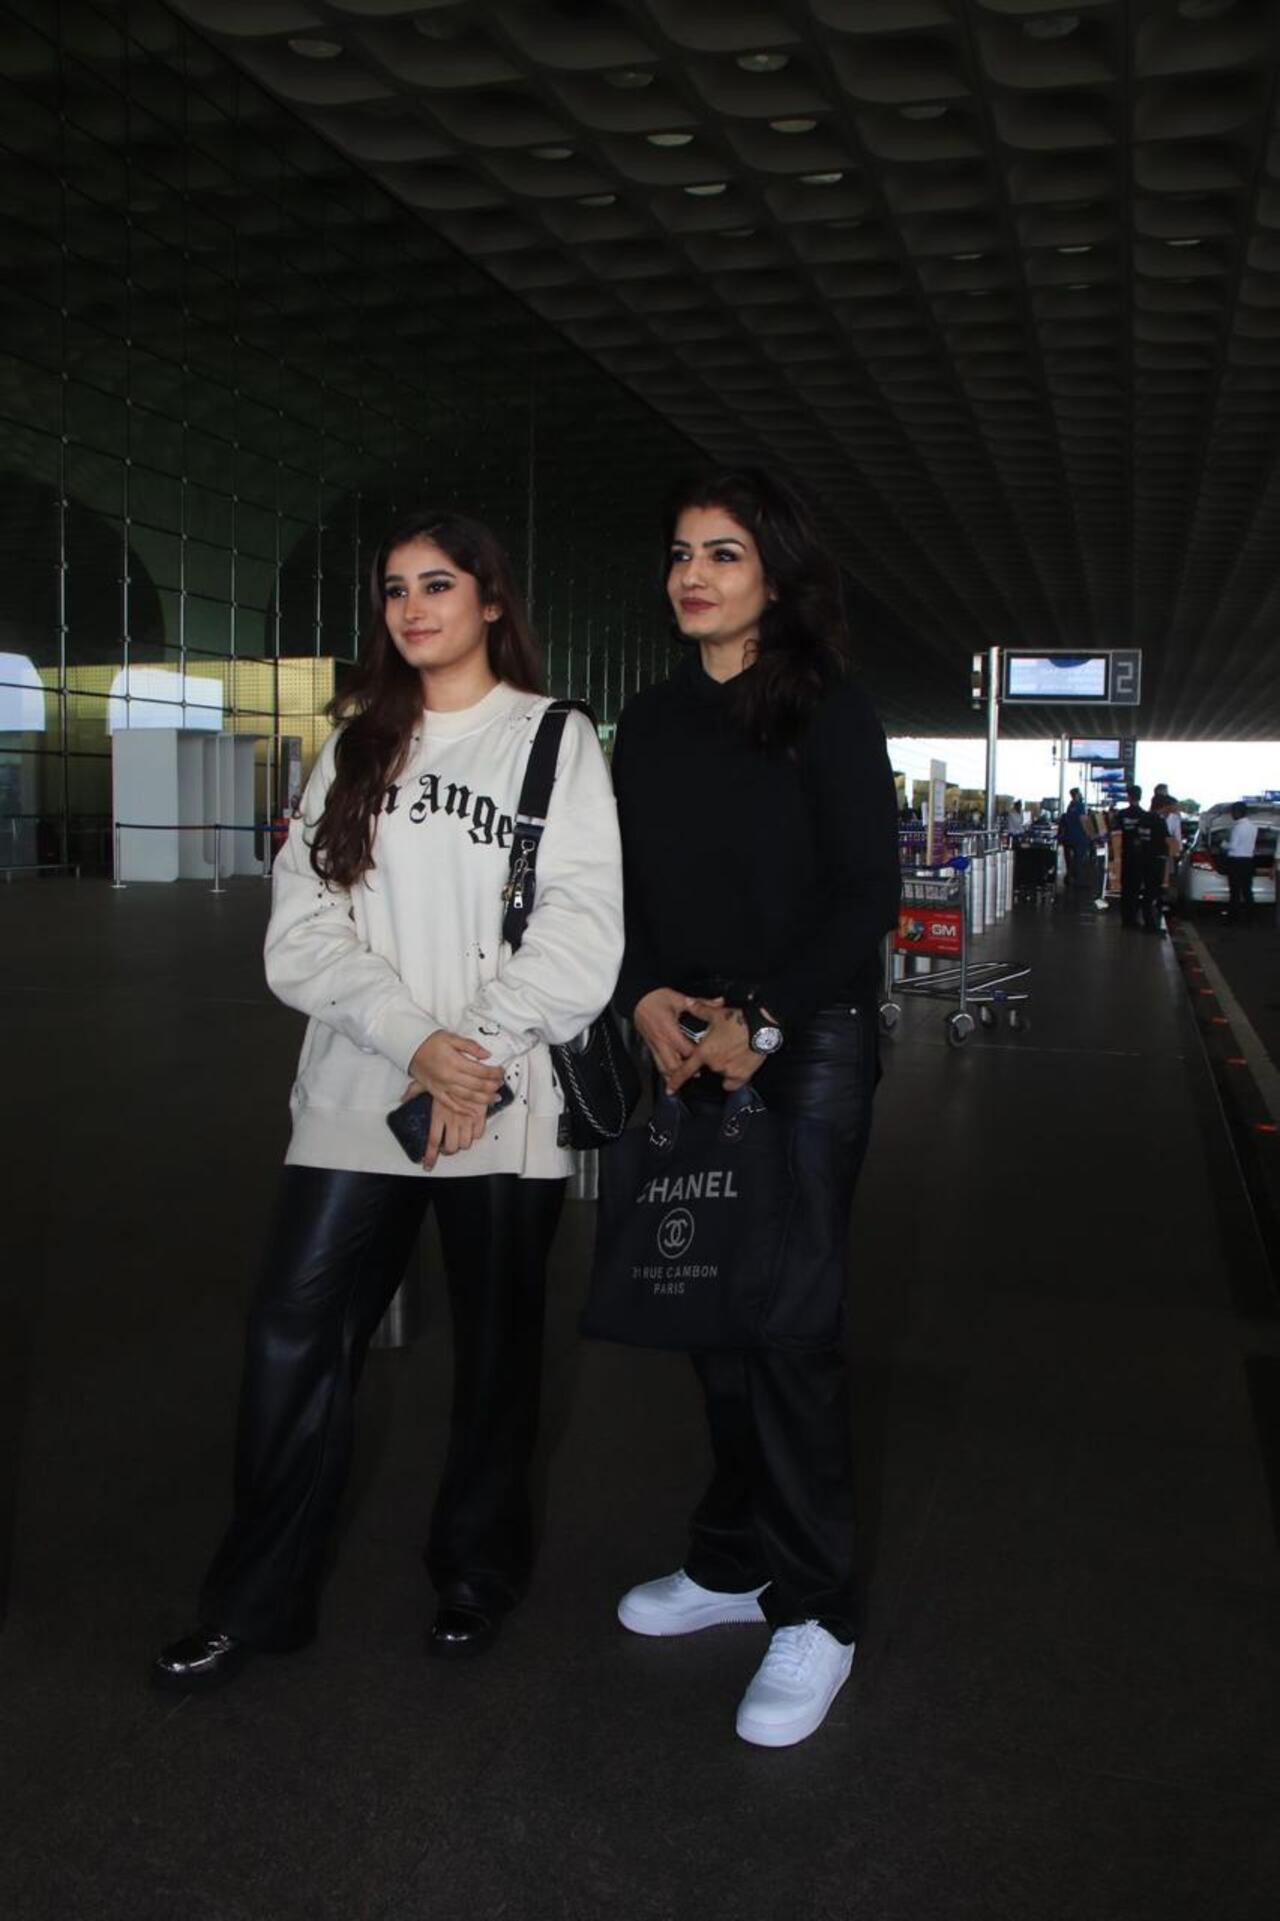 Raveena Tandon headed out of the city for a vacation with her daughter Rasha Thadani, who is an aspiring actress